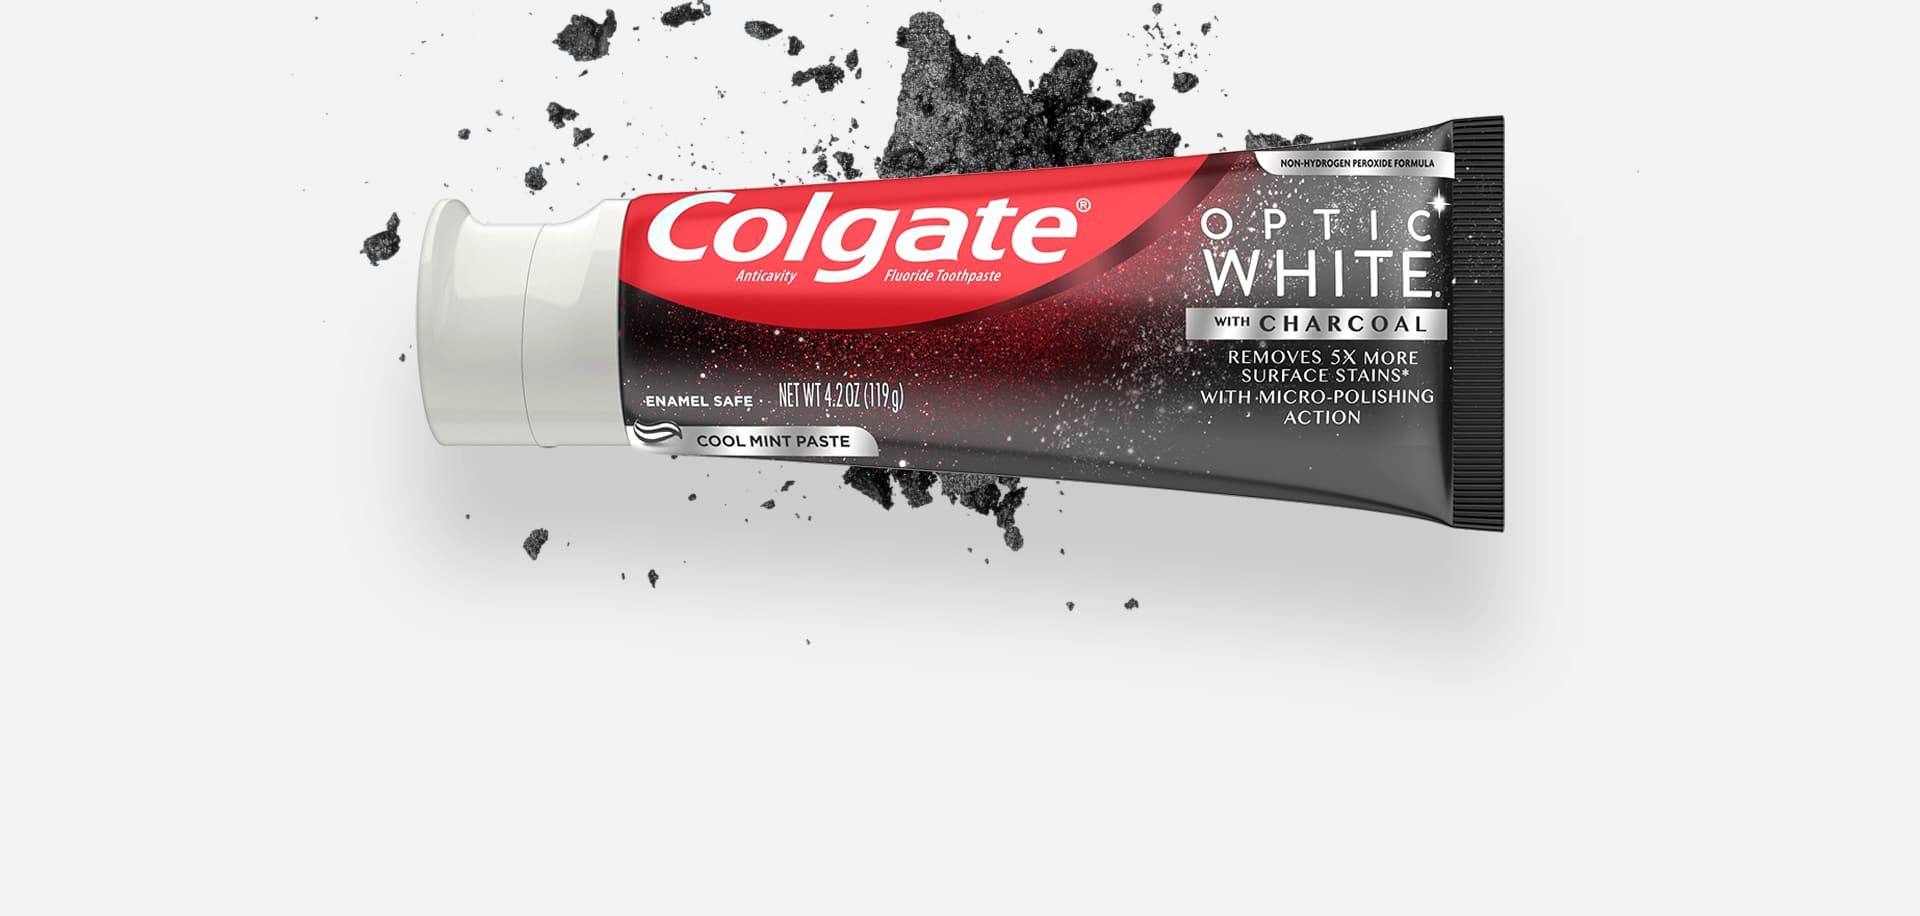 Colgate Optic White with Charcoal Whitening Toothpaste Tube